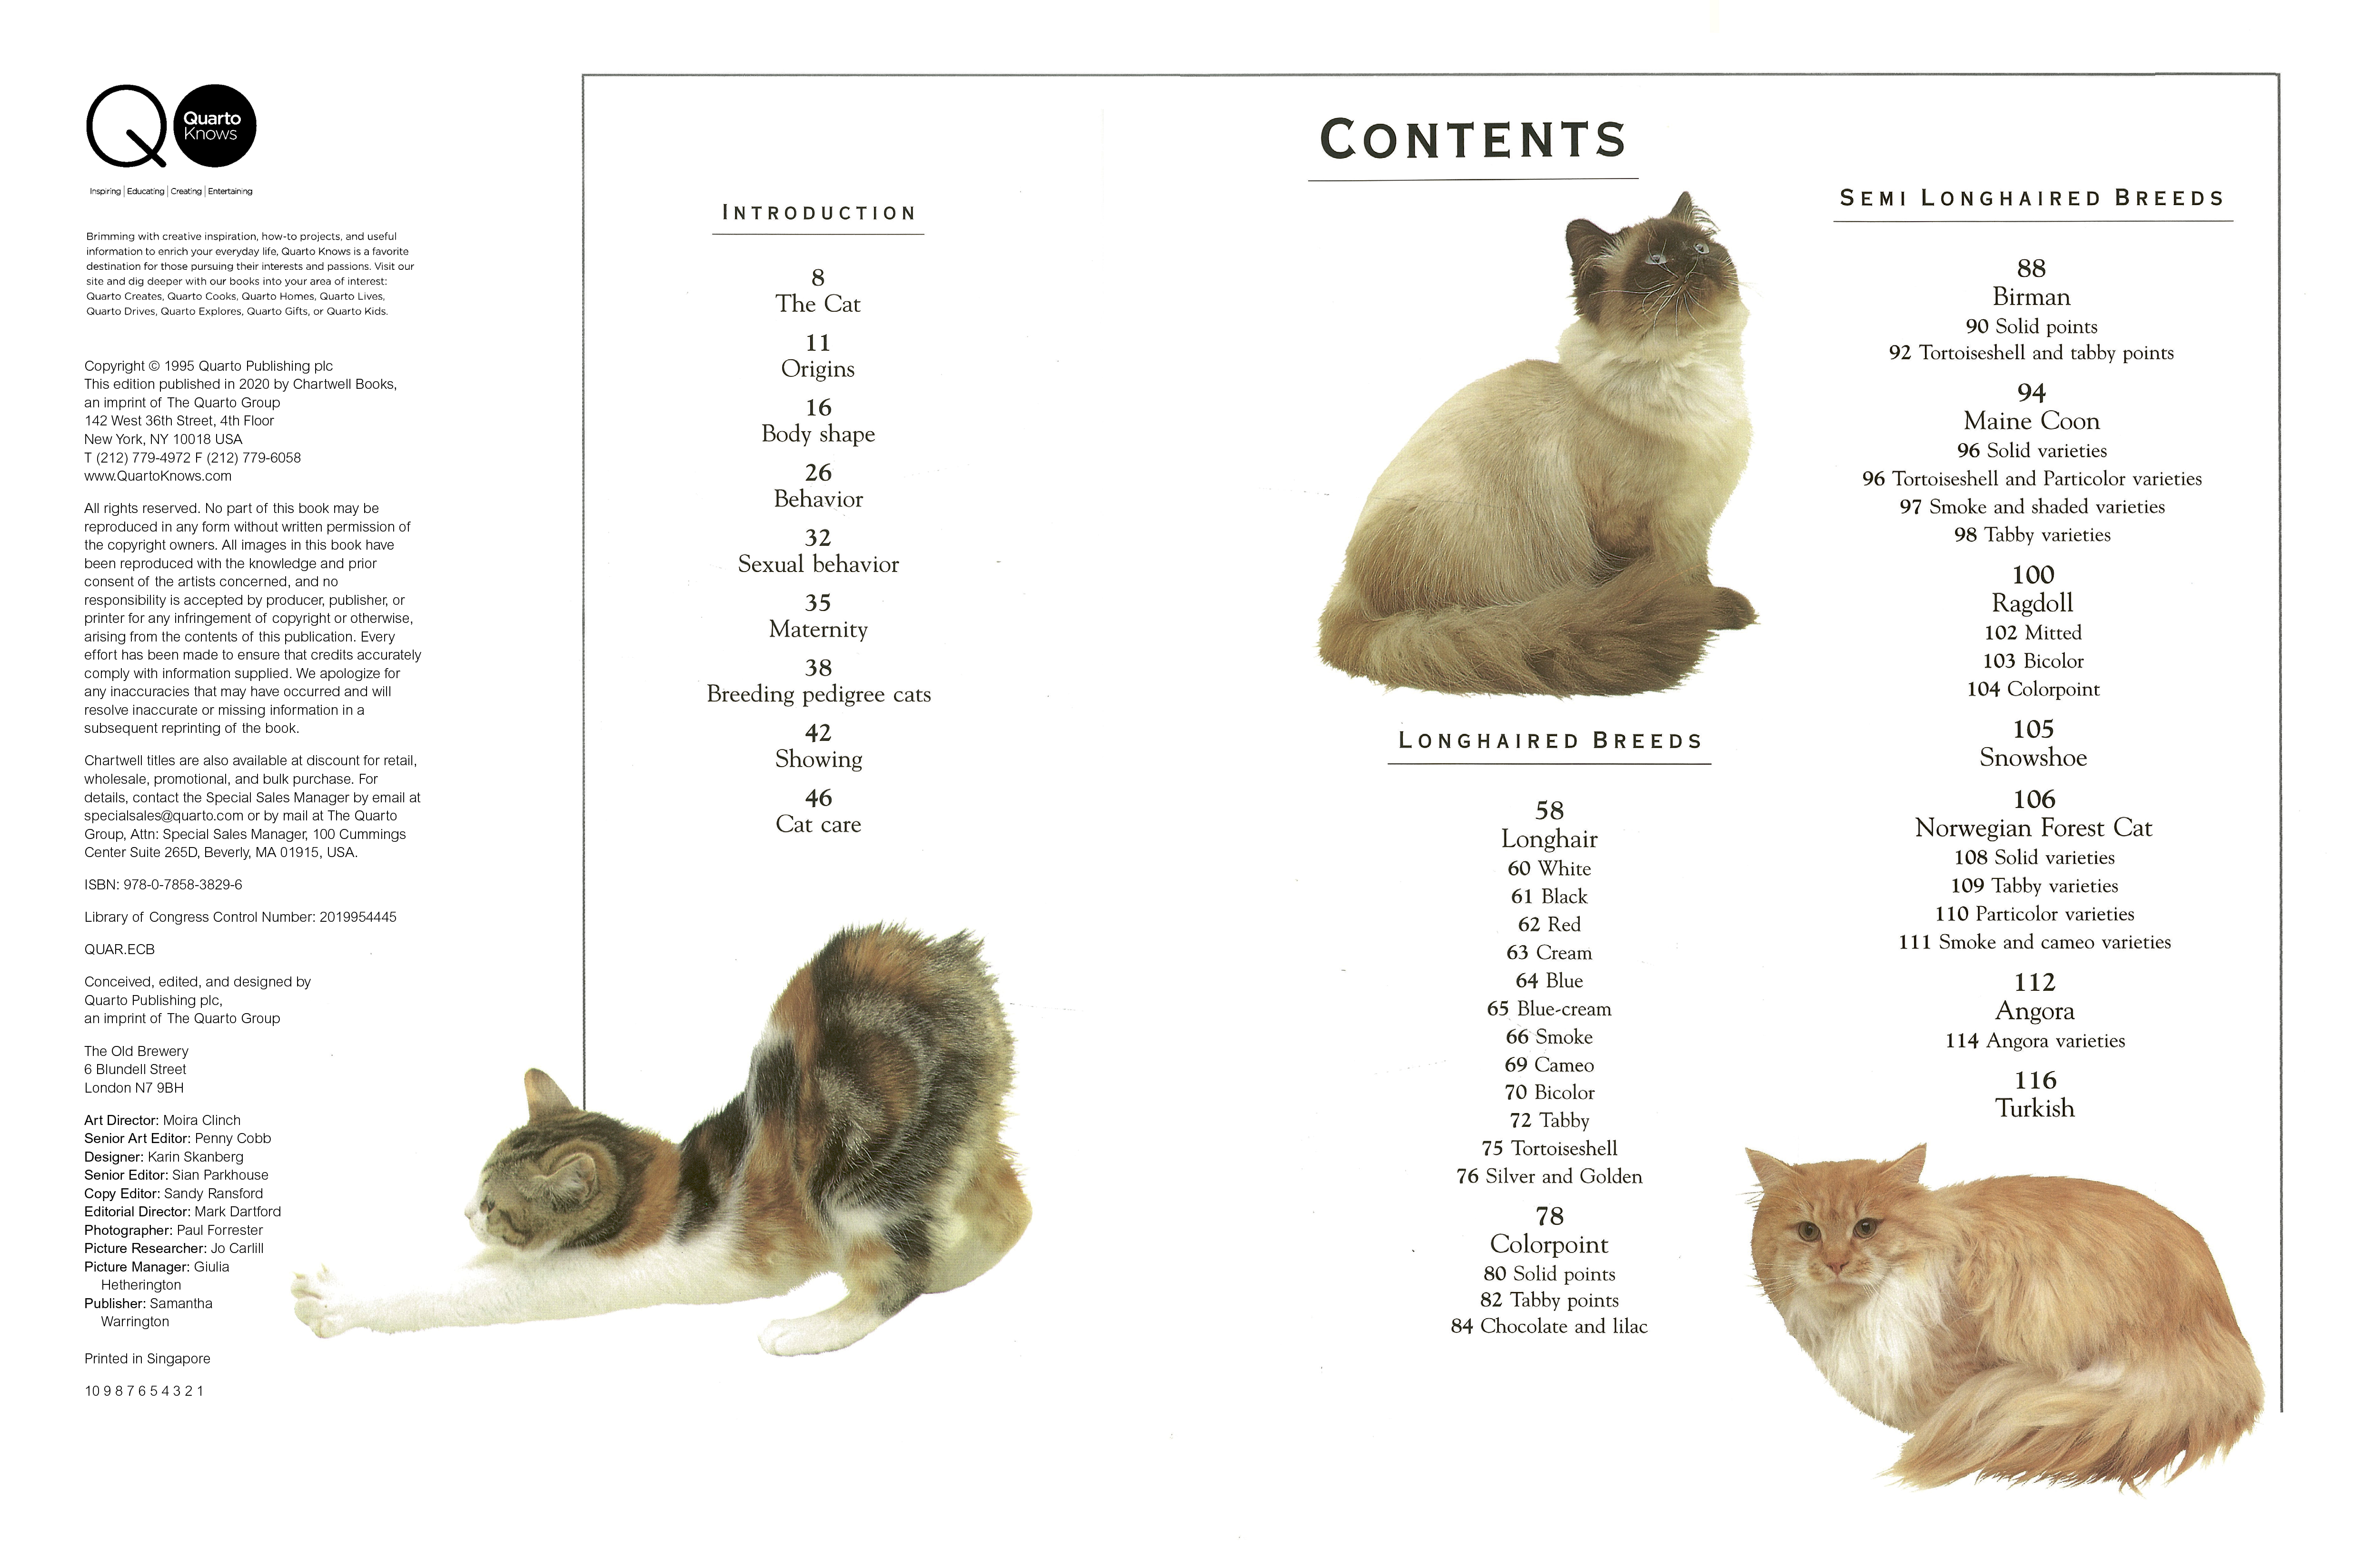 The Illustrated Encyclopedia of Cats